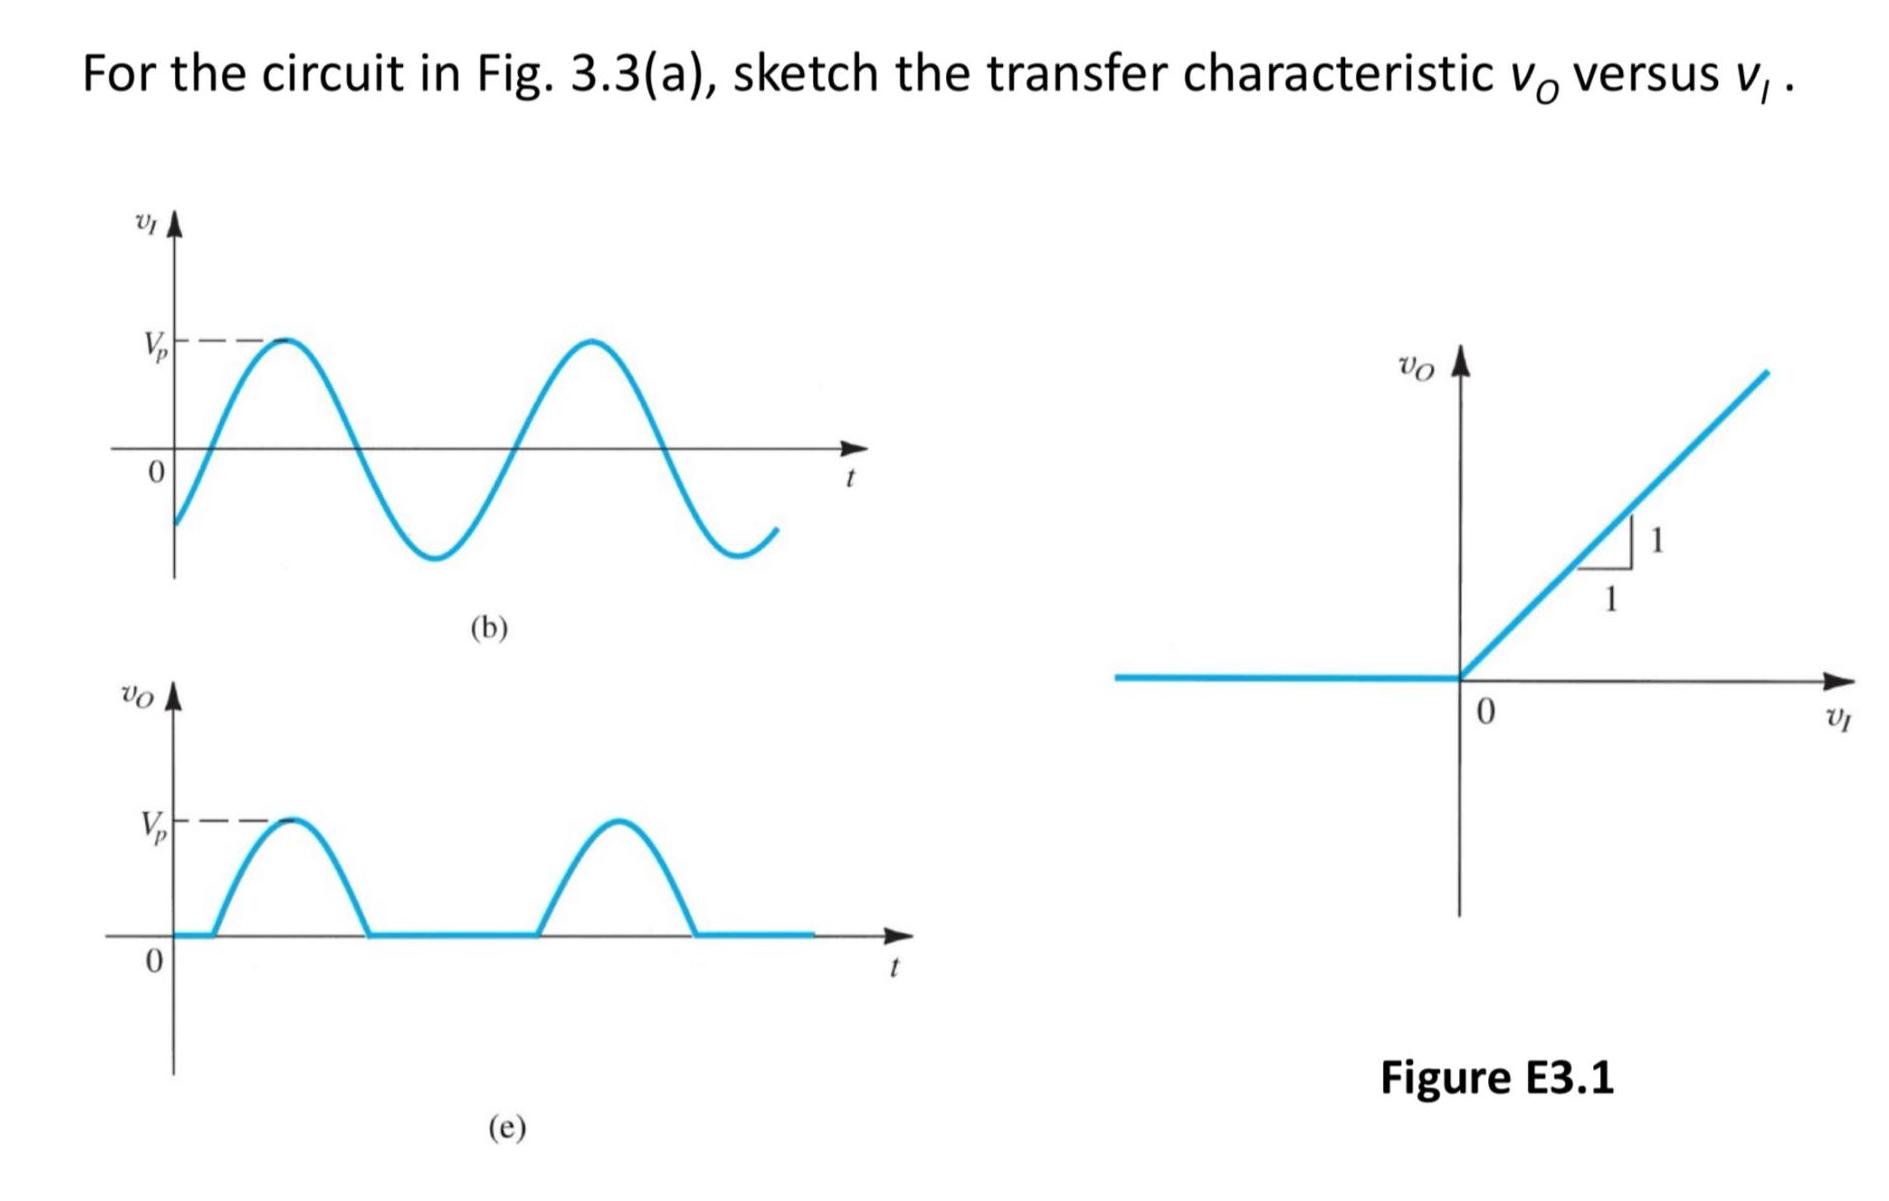 For the circuit in Fig. 3.3(a), sketch the transfer characteristic vo versus v. VI m Vp 0 VO V p. (b) 0 (e)